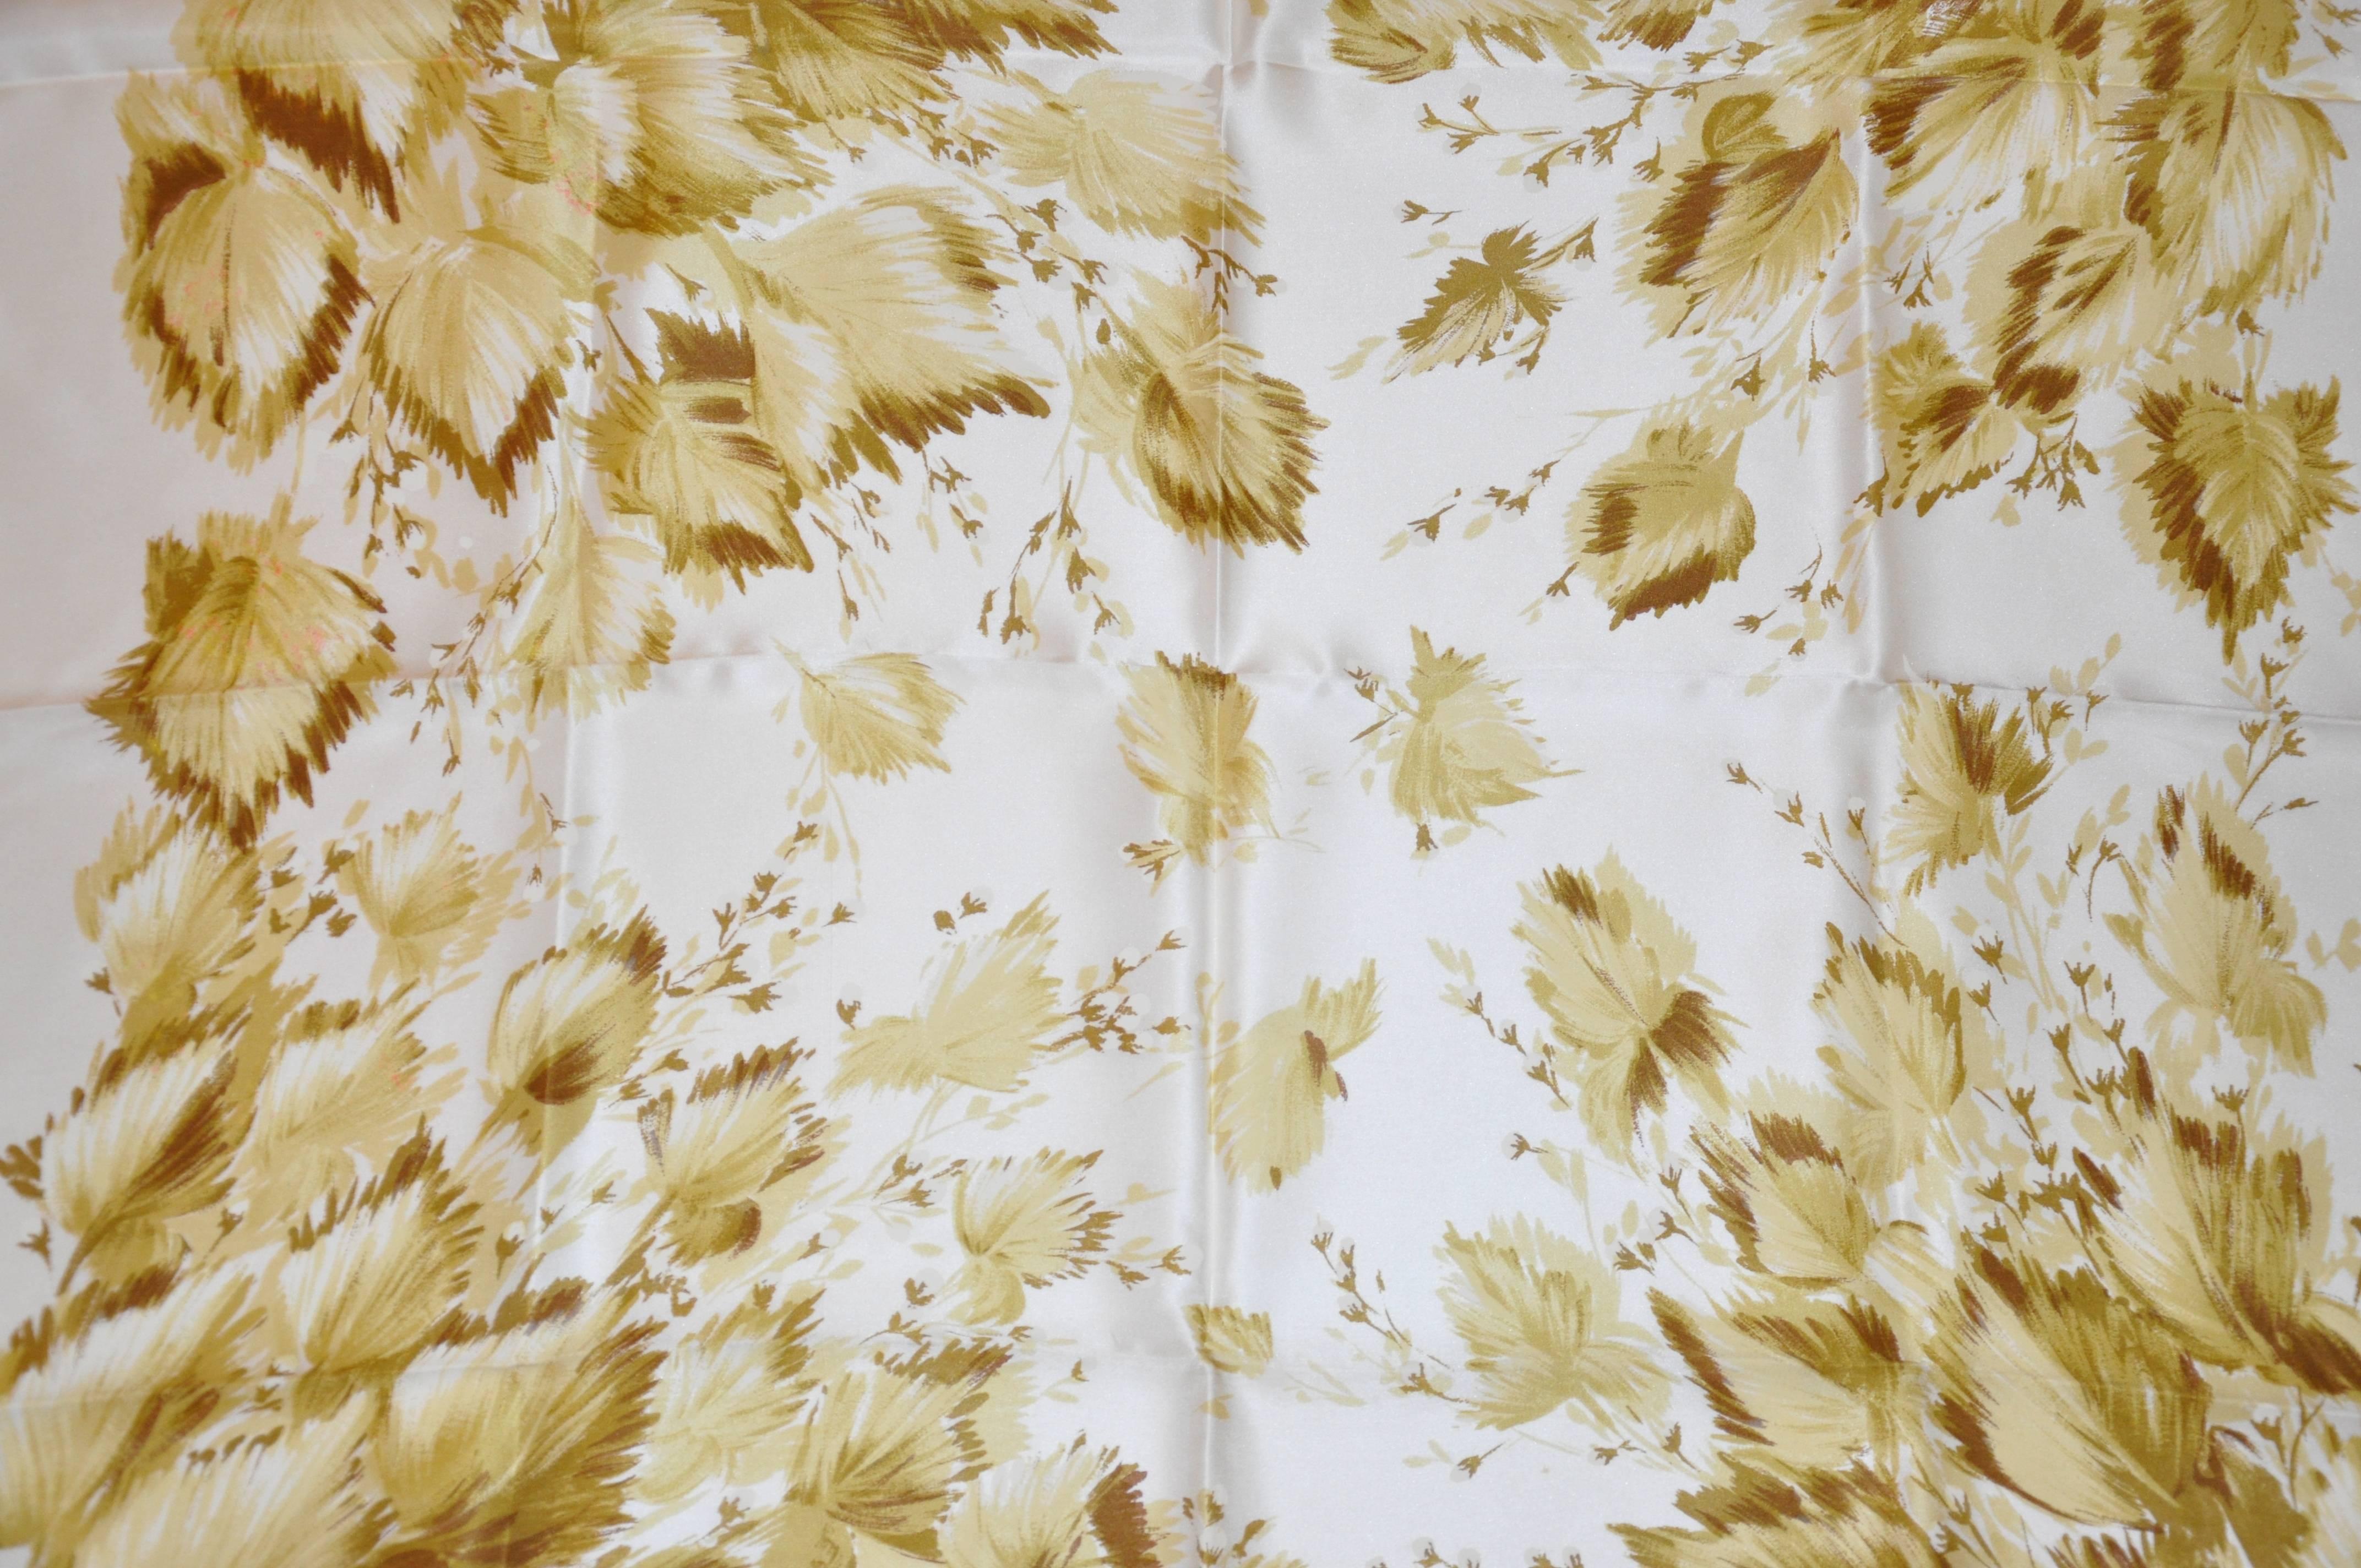 Polished Ivory and Shades of Olive & Greens Floral Silk Scarf In Good Condition For Sale In New York, NY